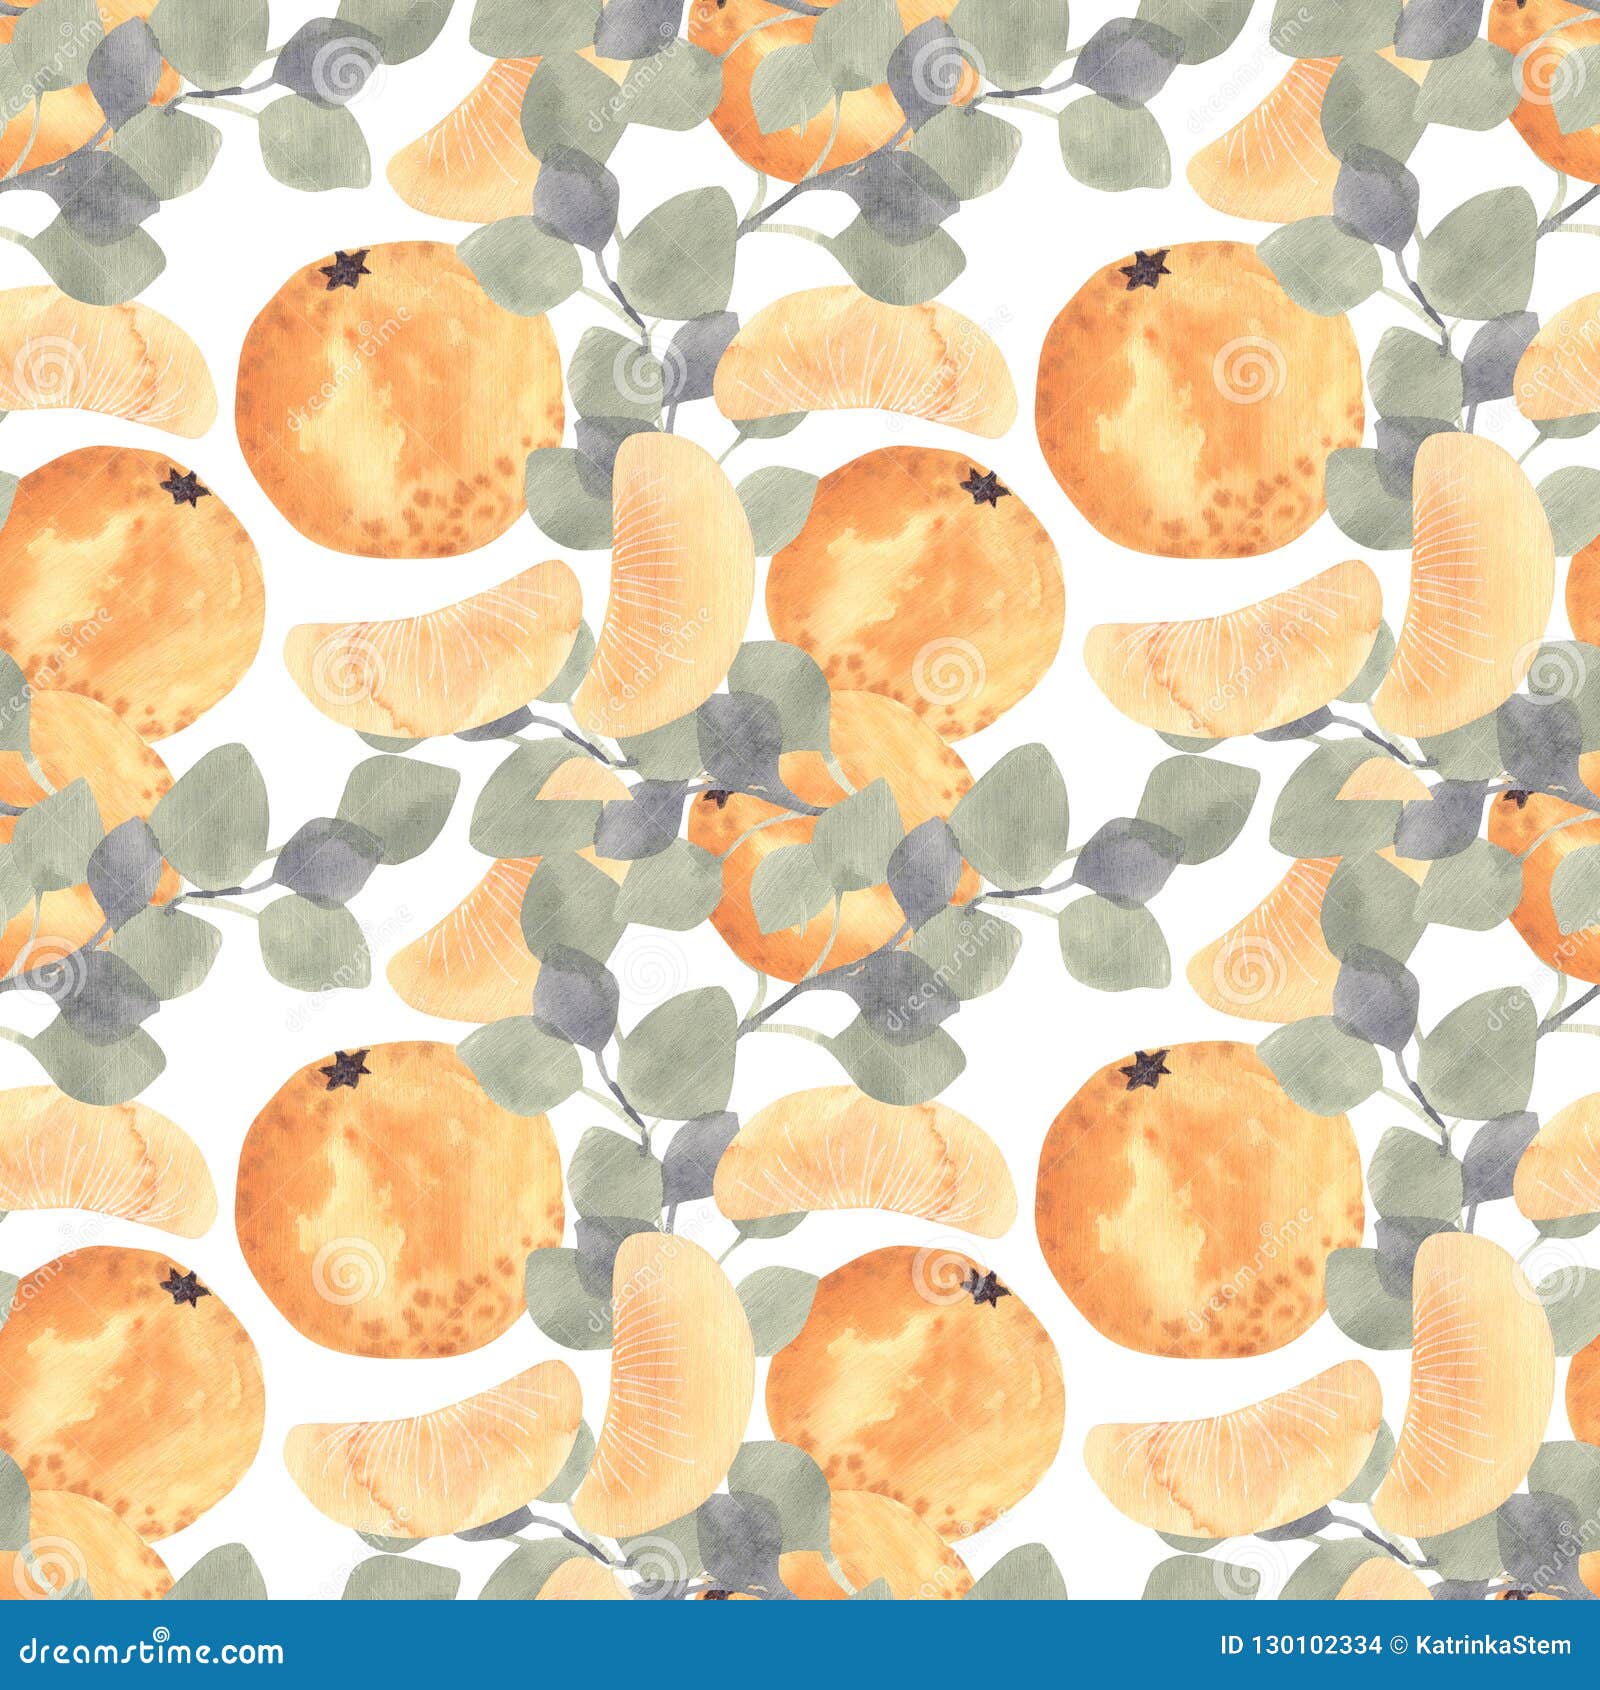 Green and Orange 10x12 FT Backdrop Photographers,Slices of Oranges with Leaves Summer Watercolor Fruit Pattern Background for Baby Birthday Party Wedding Vinyl Studio Props Photography 